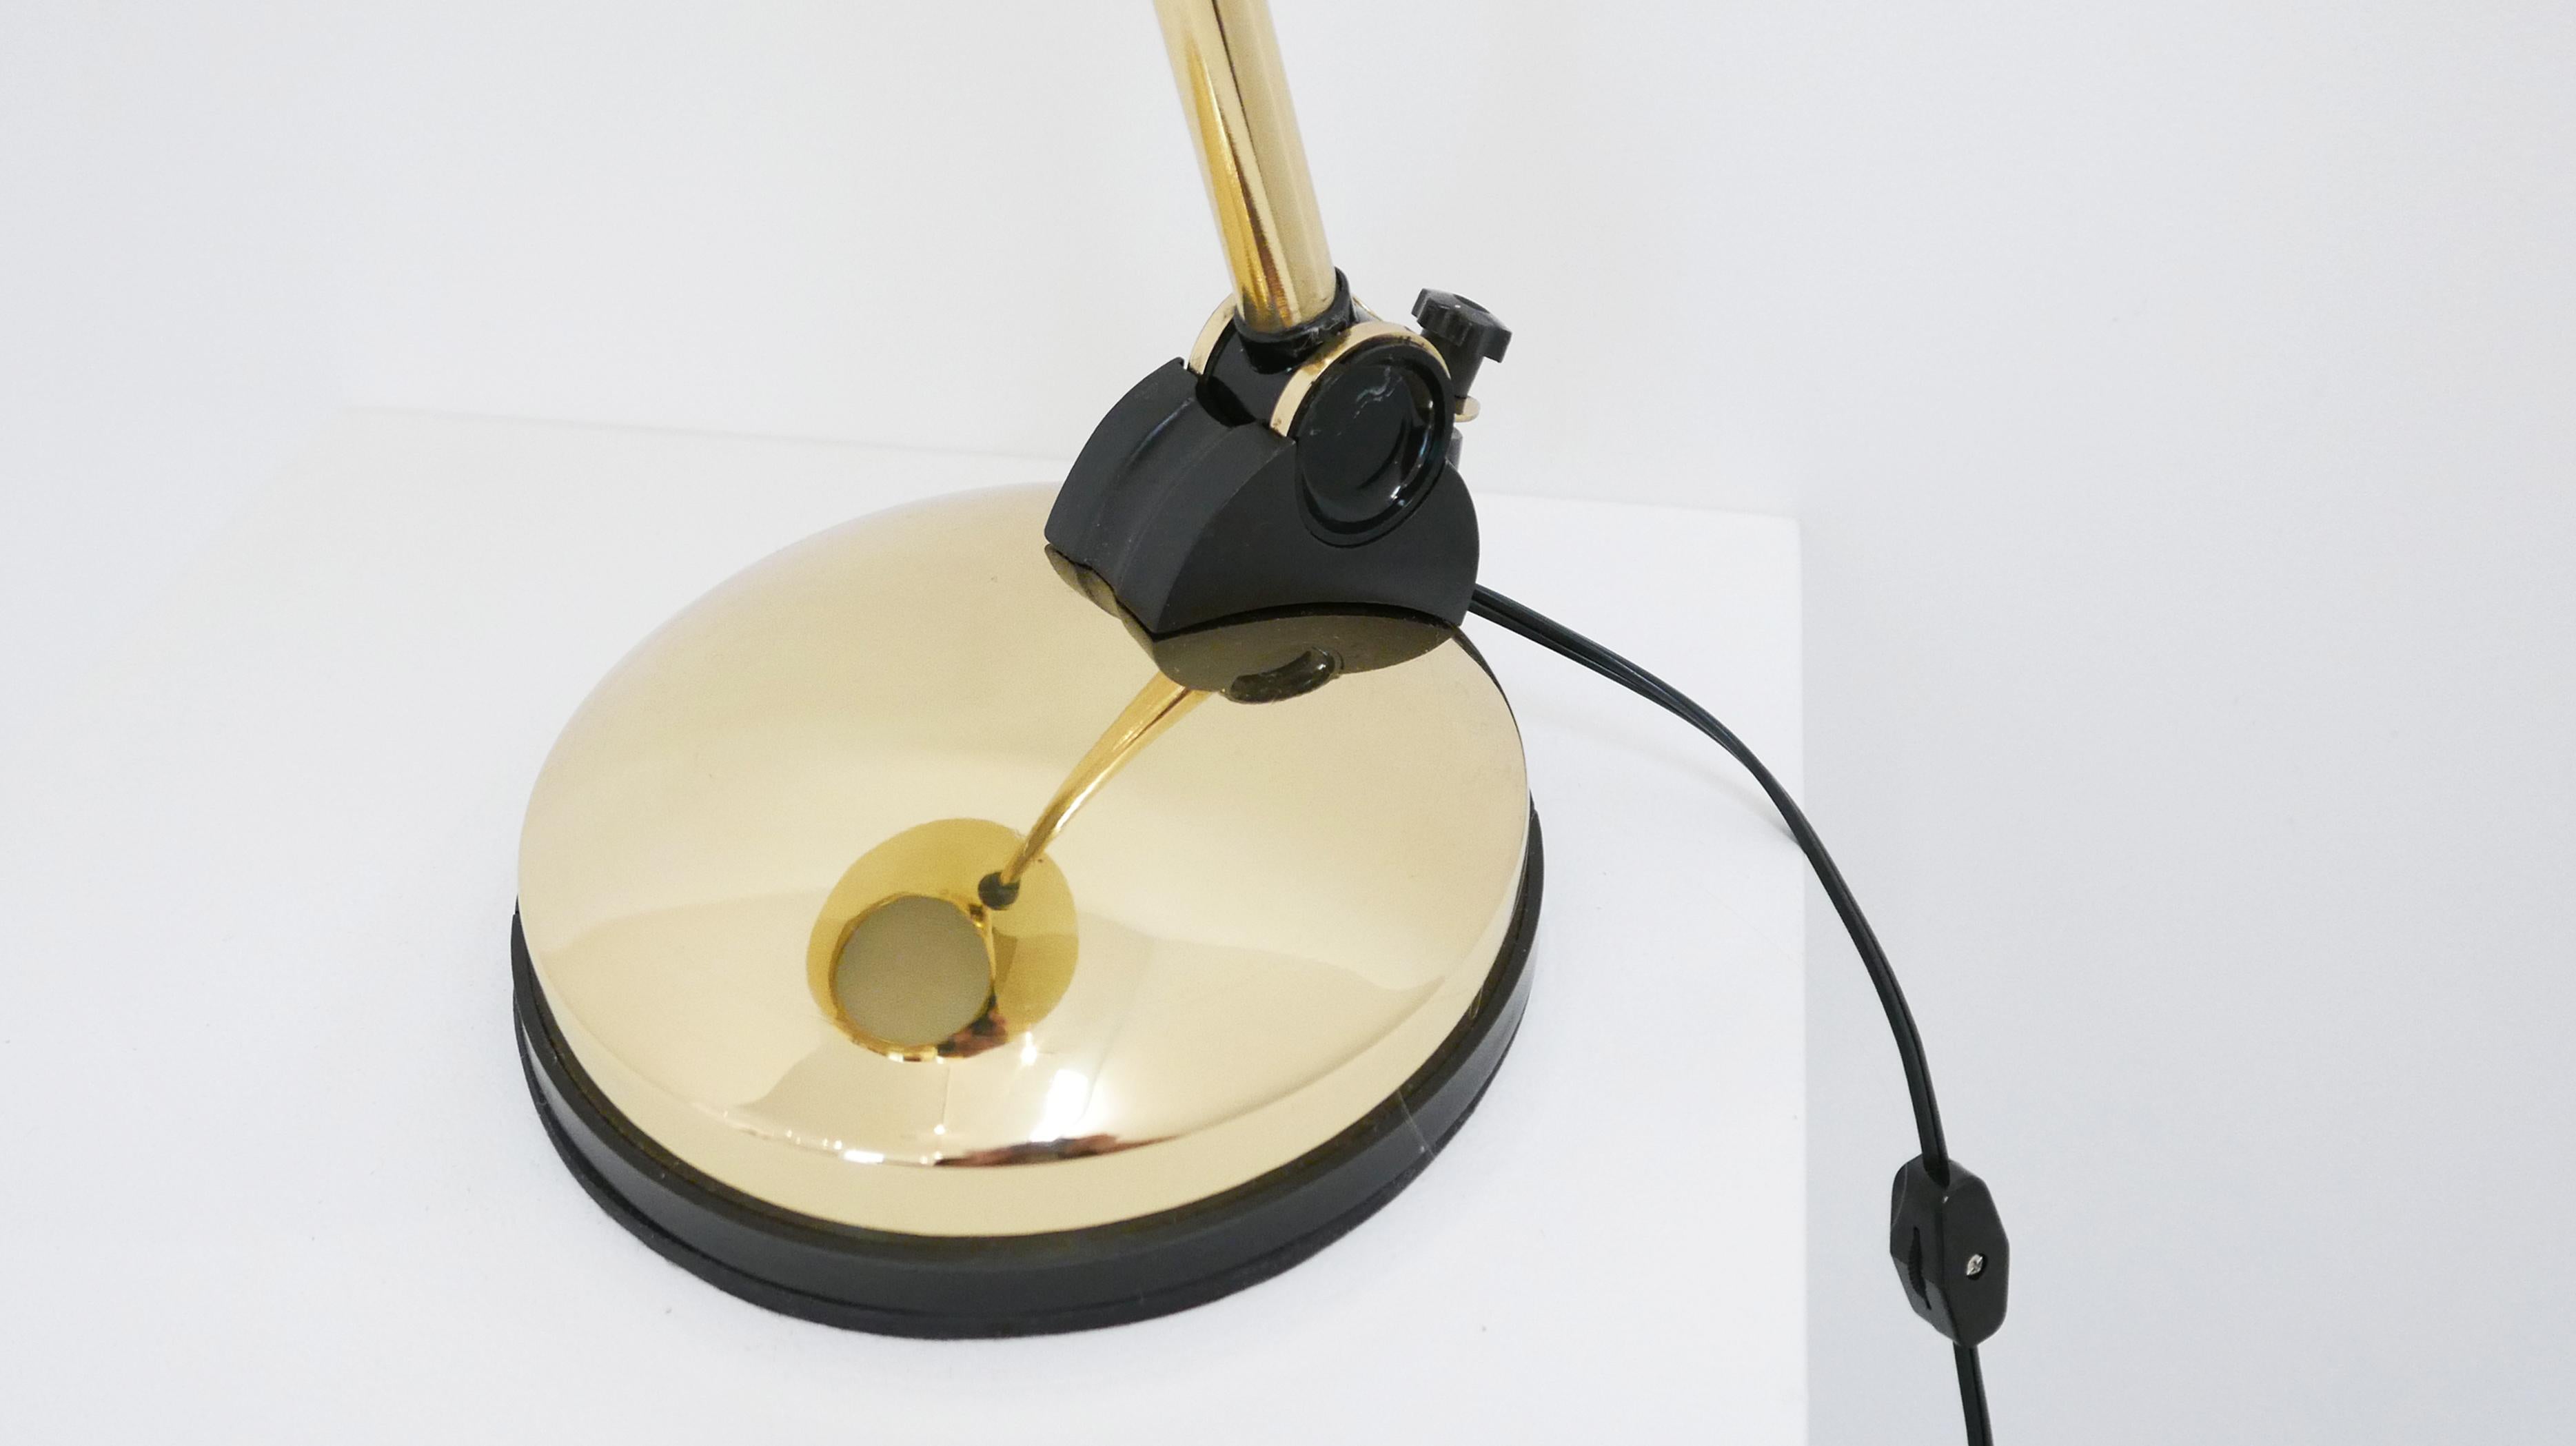 Frosted Oscar Torlasco Midcentury Desk Lamp, circa 1950s For Sale